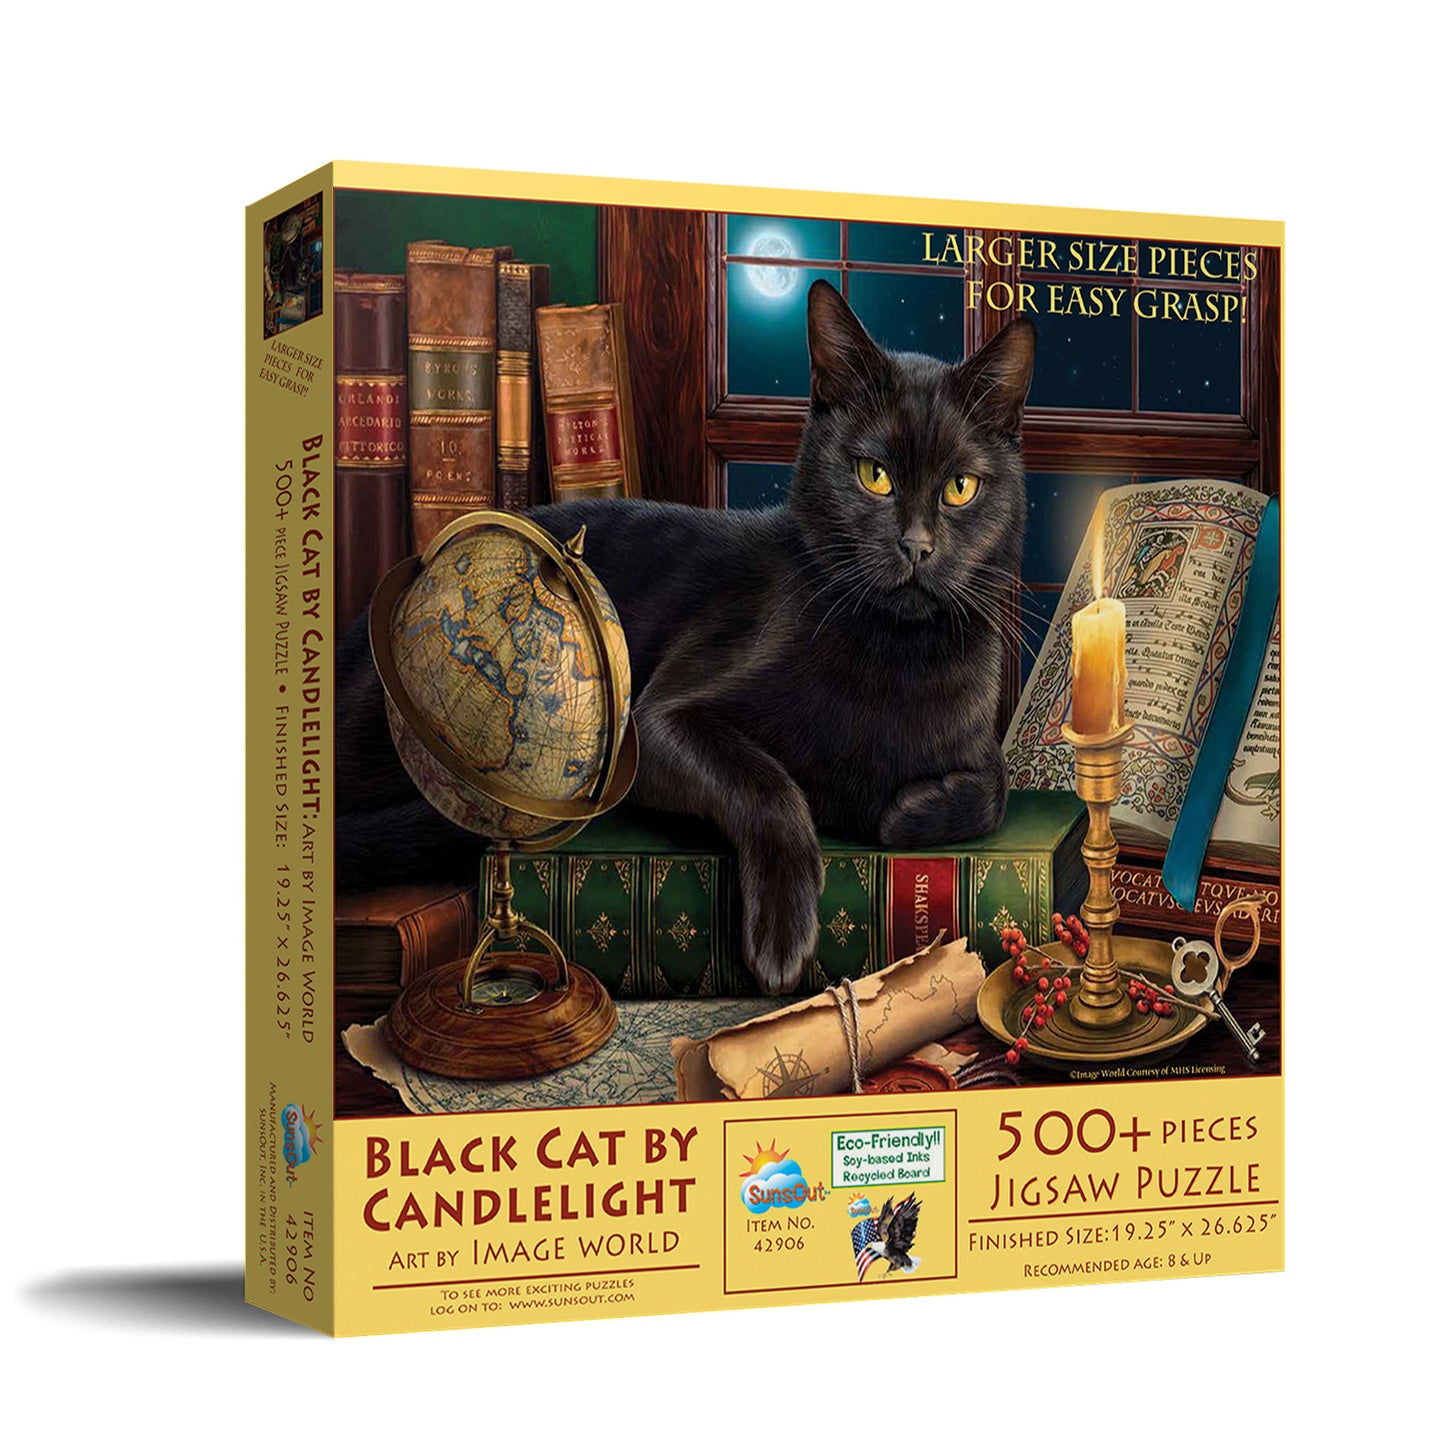 Black Cat by Candlelight - 500 Large Piece Jigsaw Puzzle